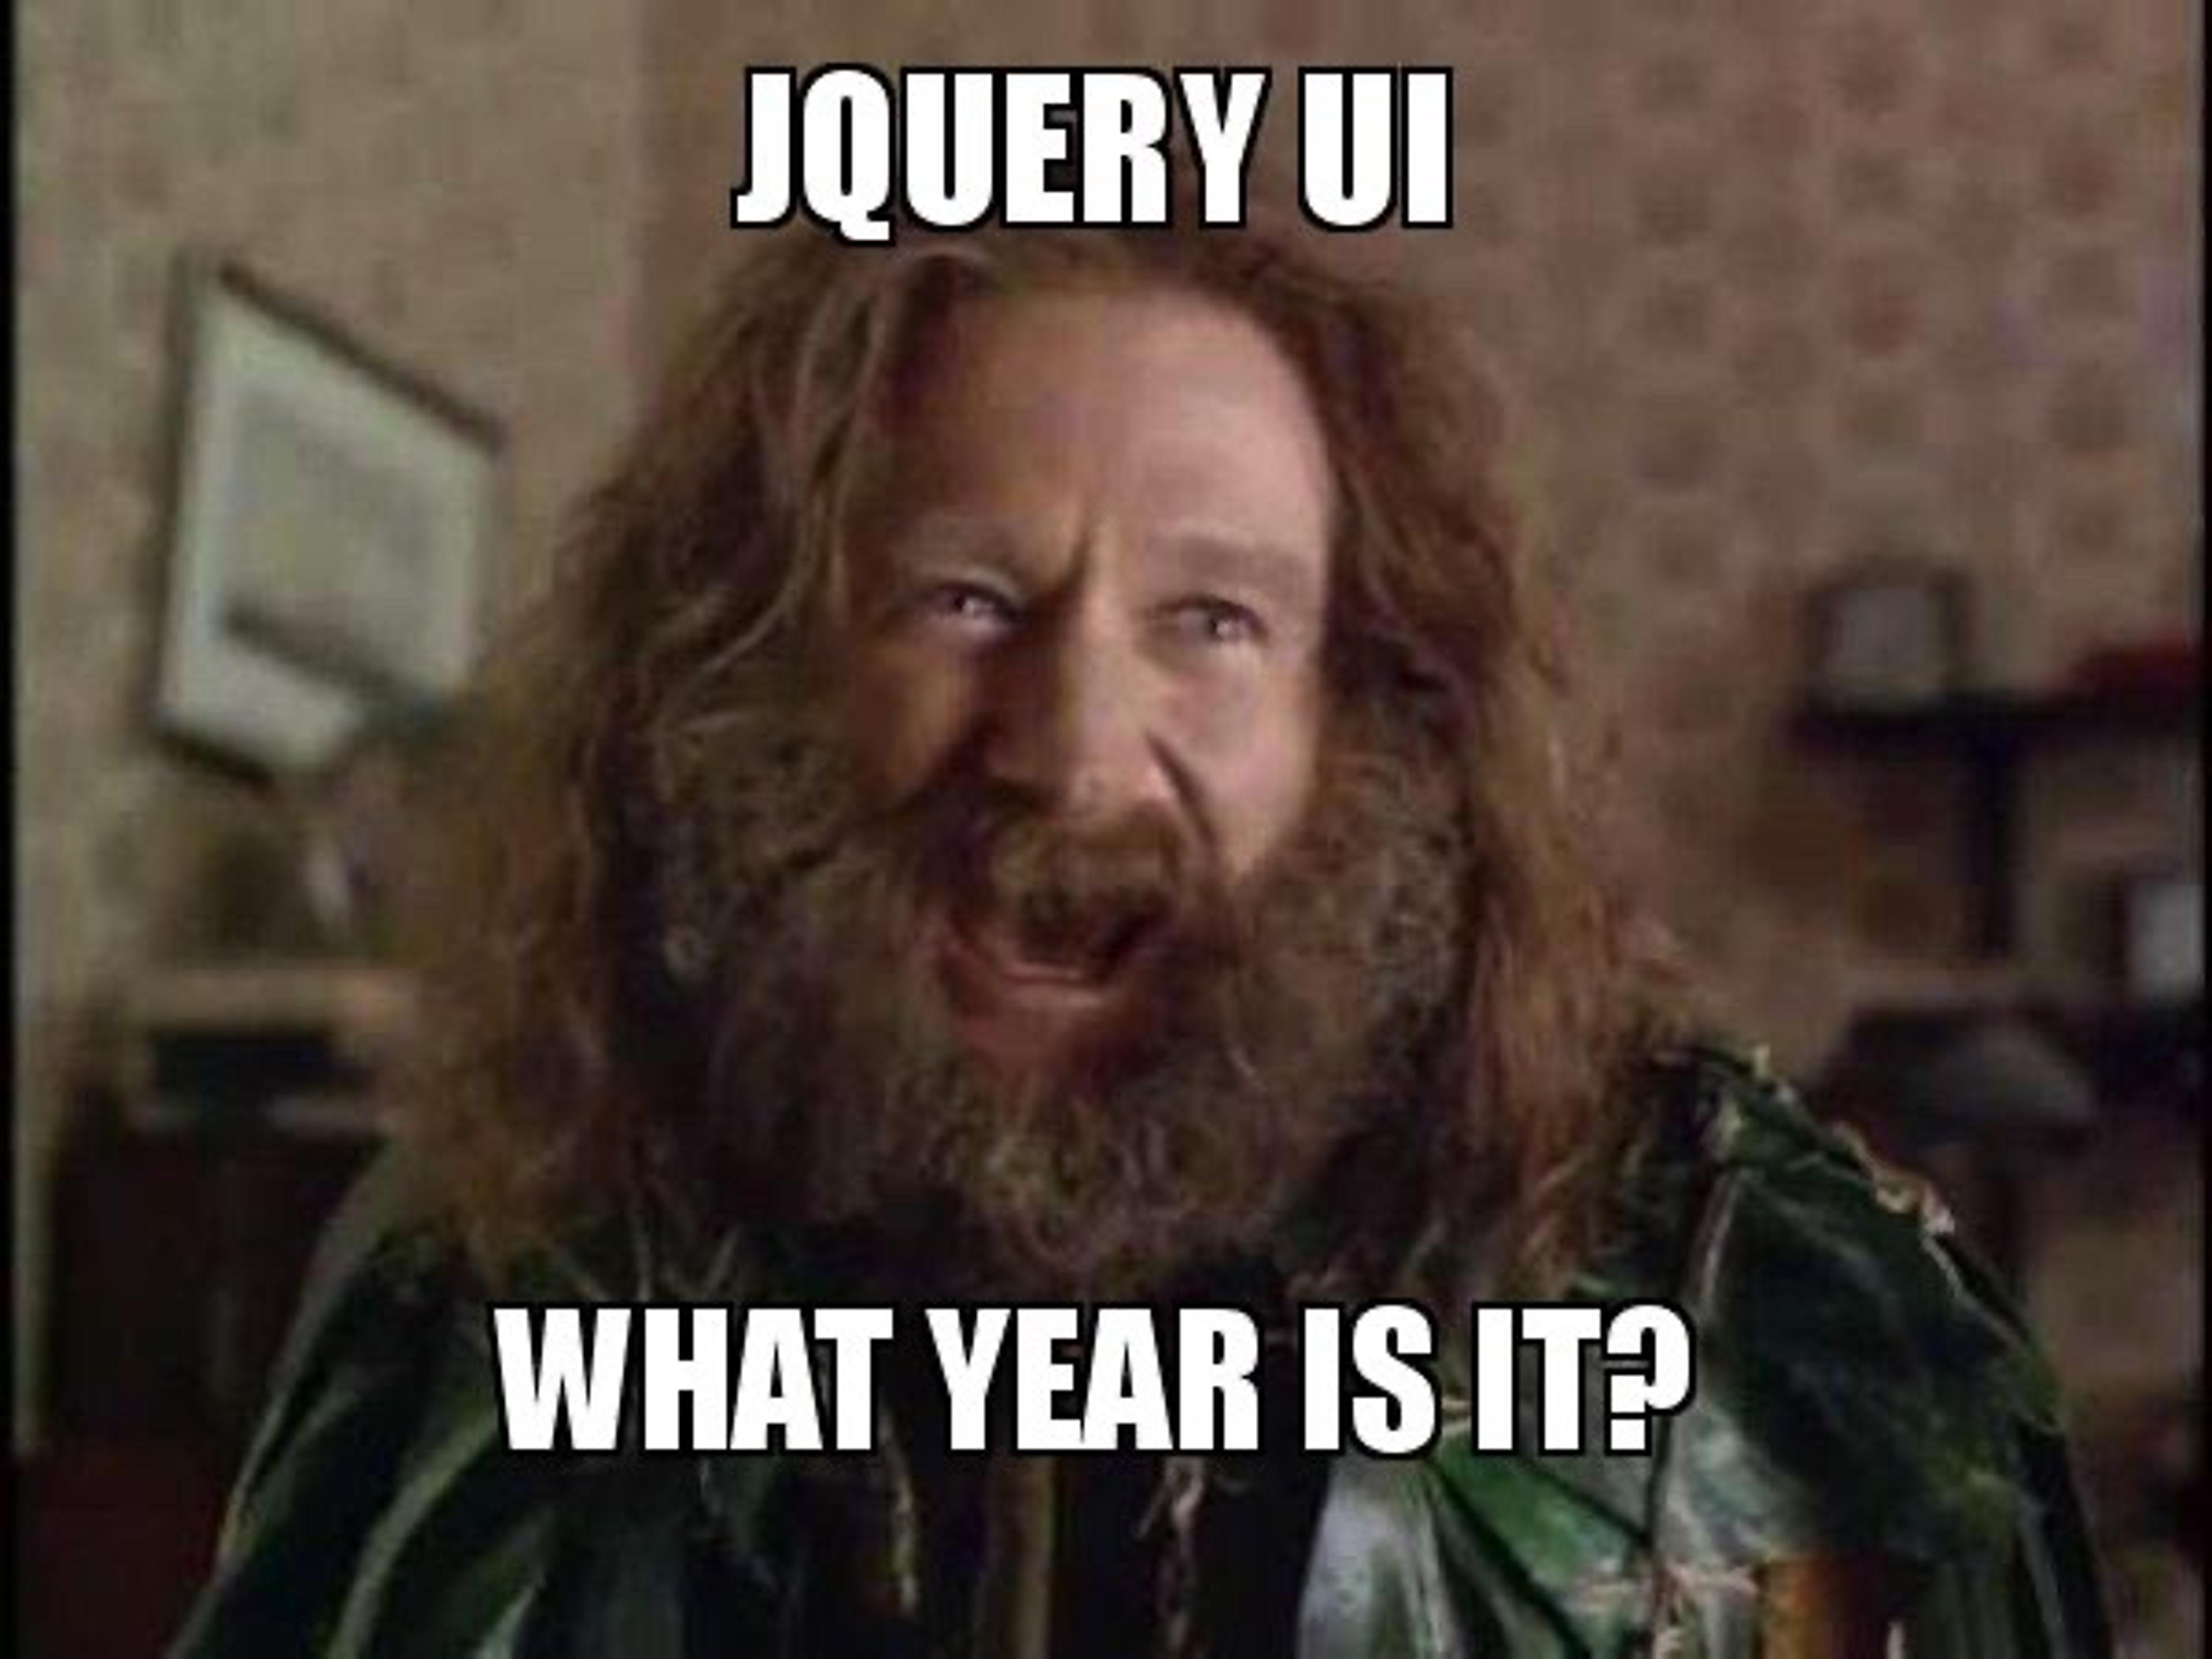 Meme depicting a man with overgrown hair. Text reads: Jquery UI. What year is it?